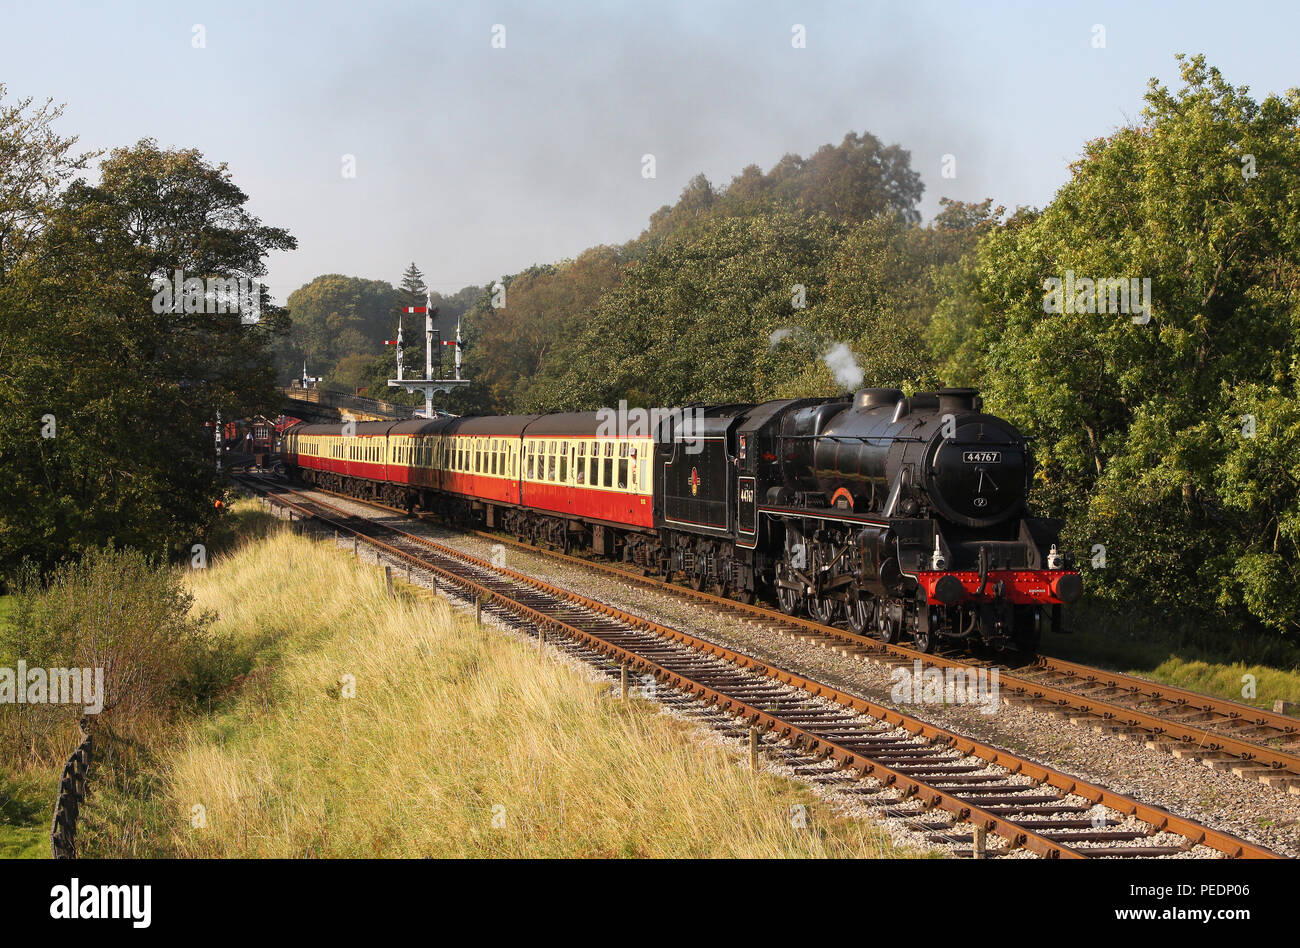 44767 departs Goathland on the NYMR 30.9.11 Stock Photo